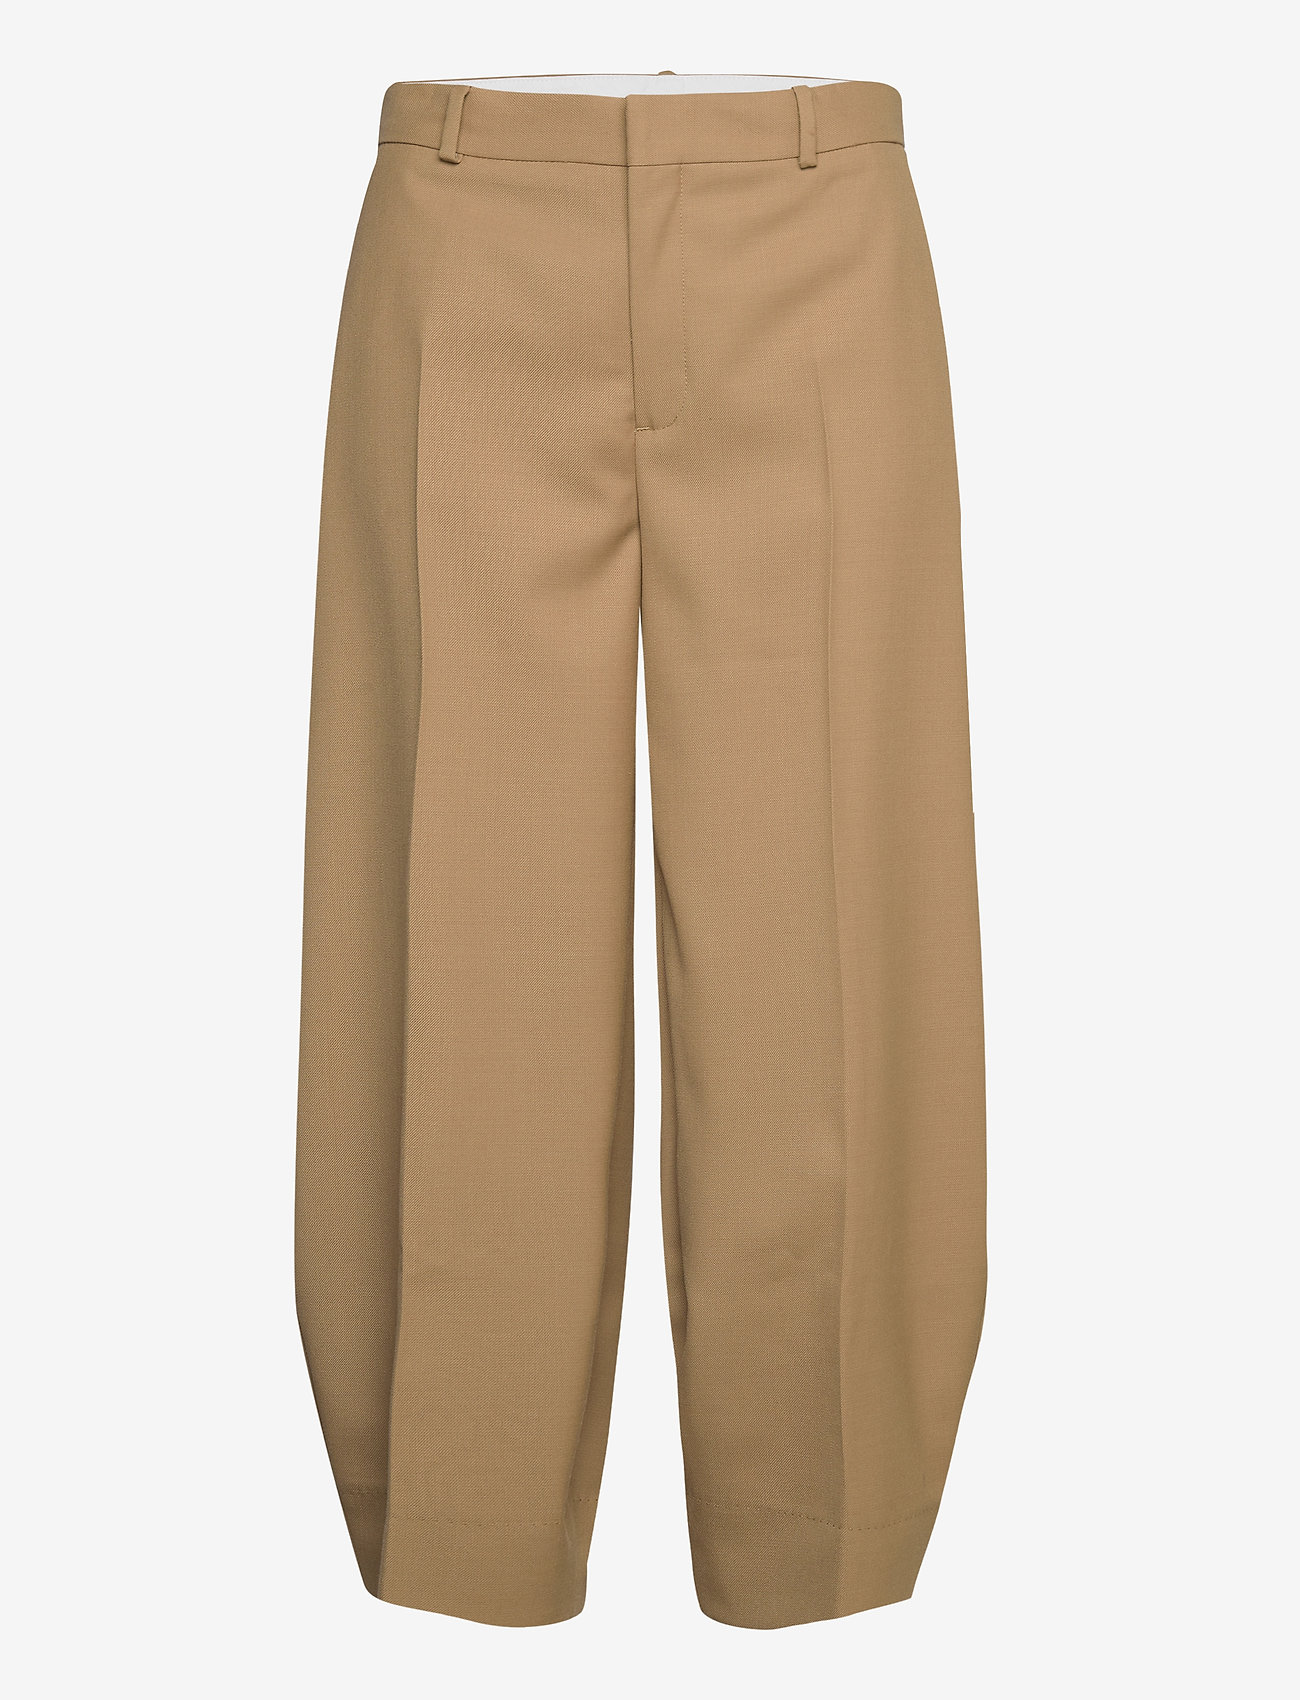 RODEBJER - RODEBJER AIA - culottes - camel - 0